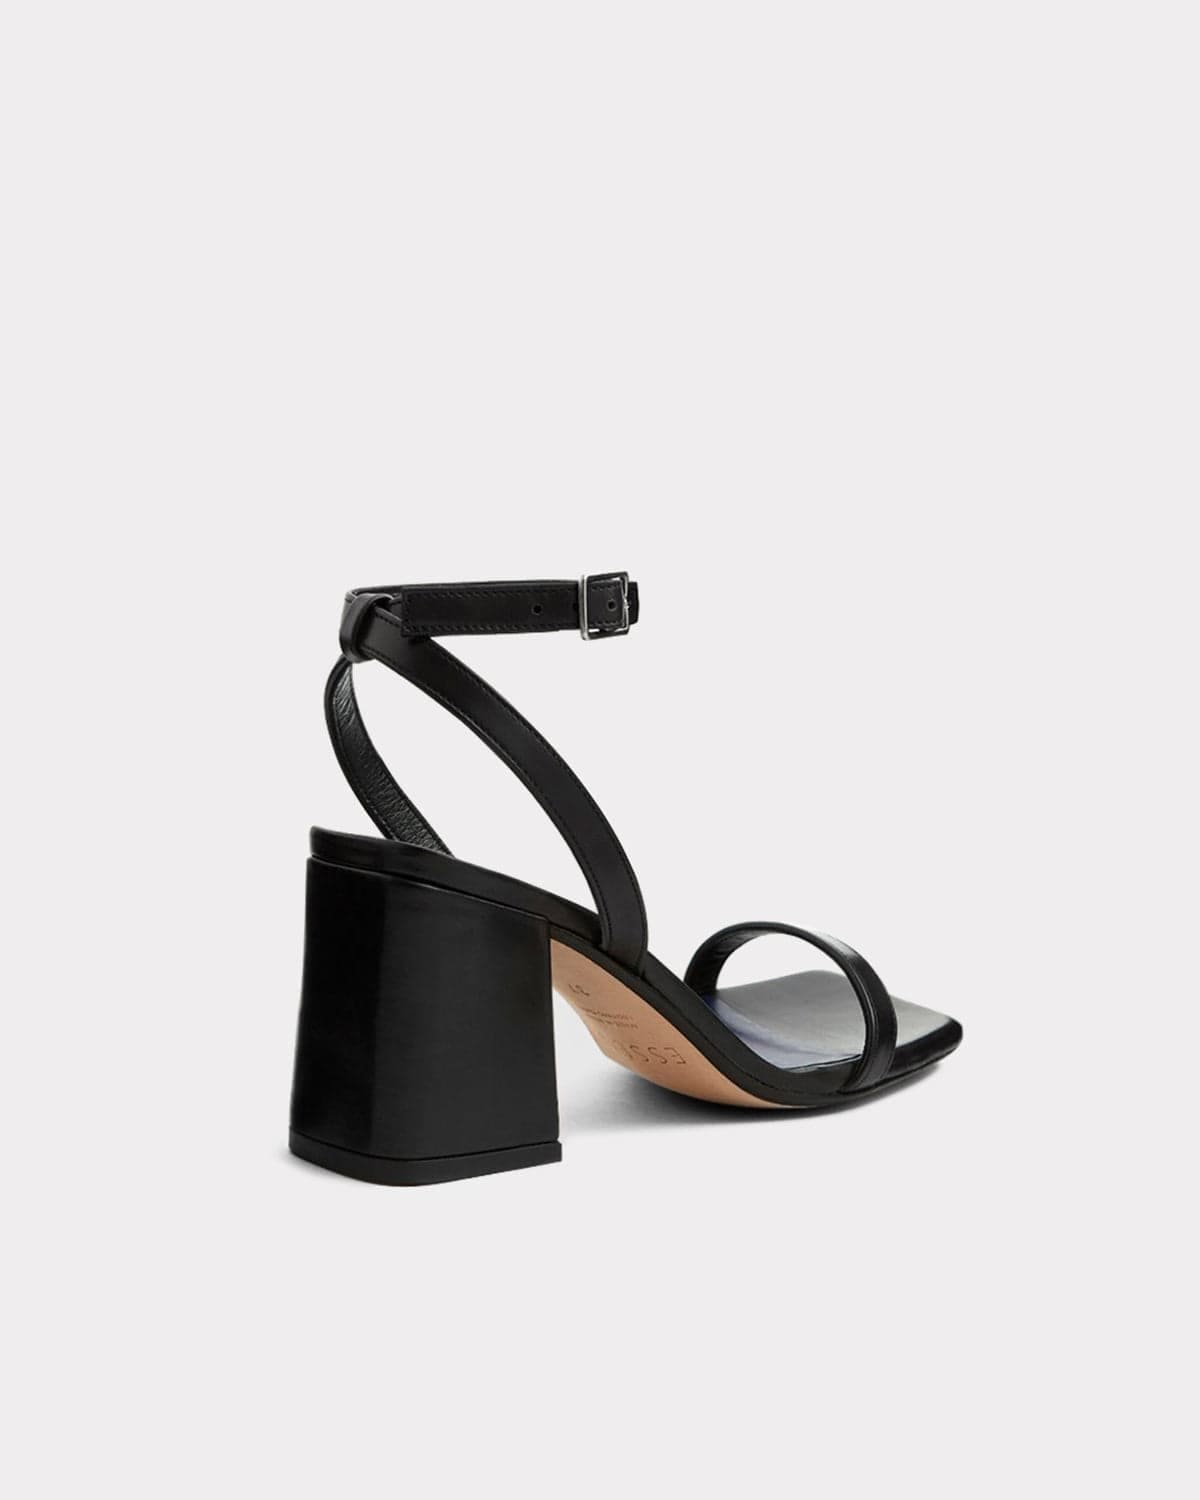 I Saw It First Barely There Heeled Sandals | SportsDirect.com USA